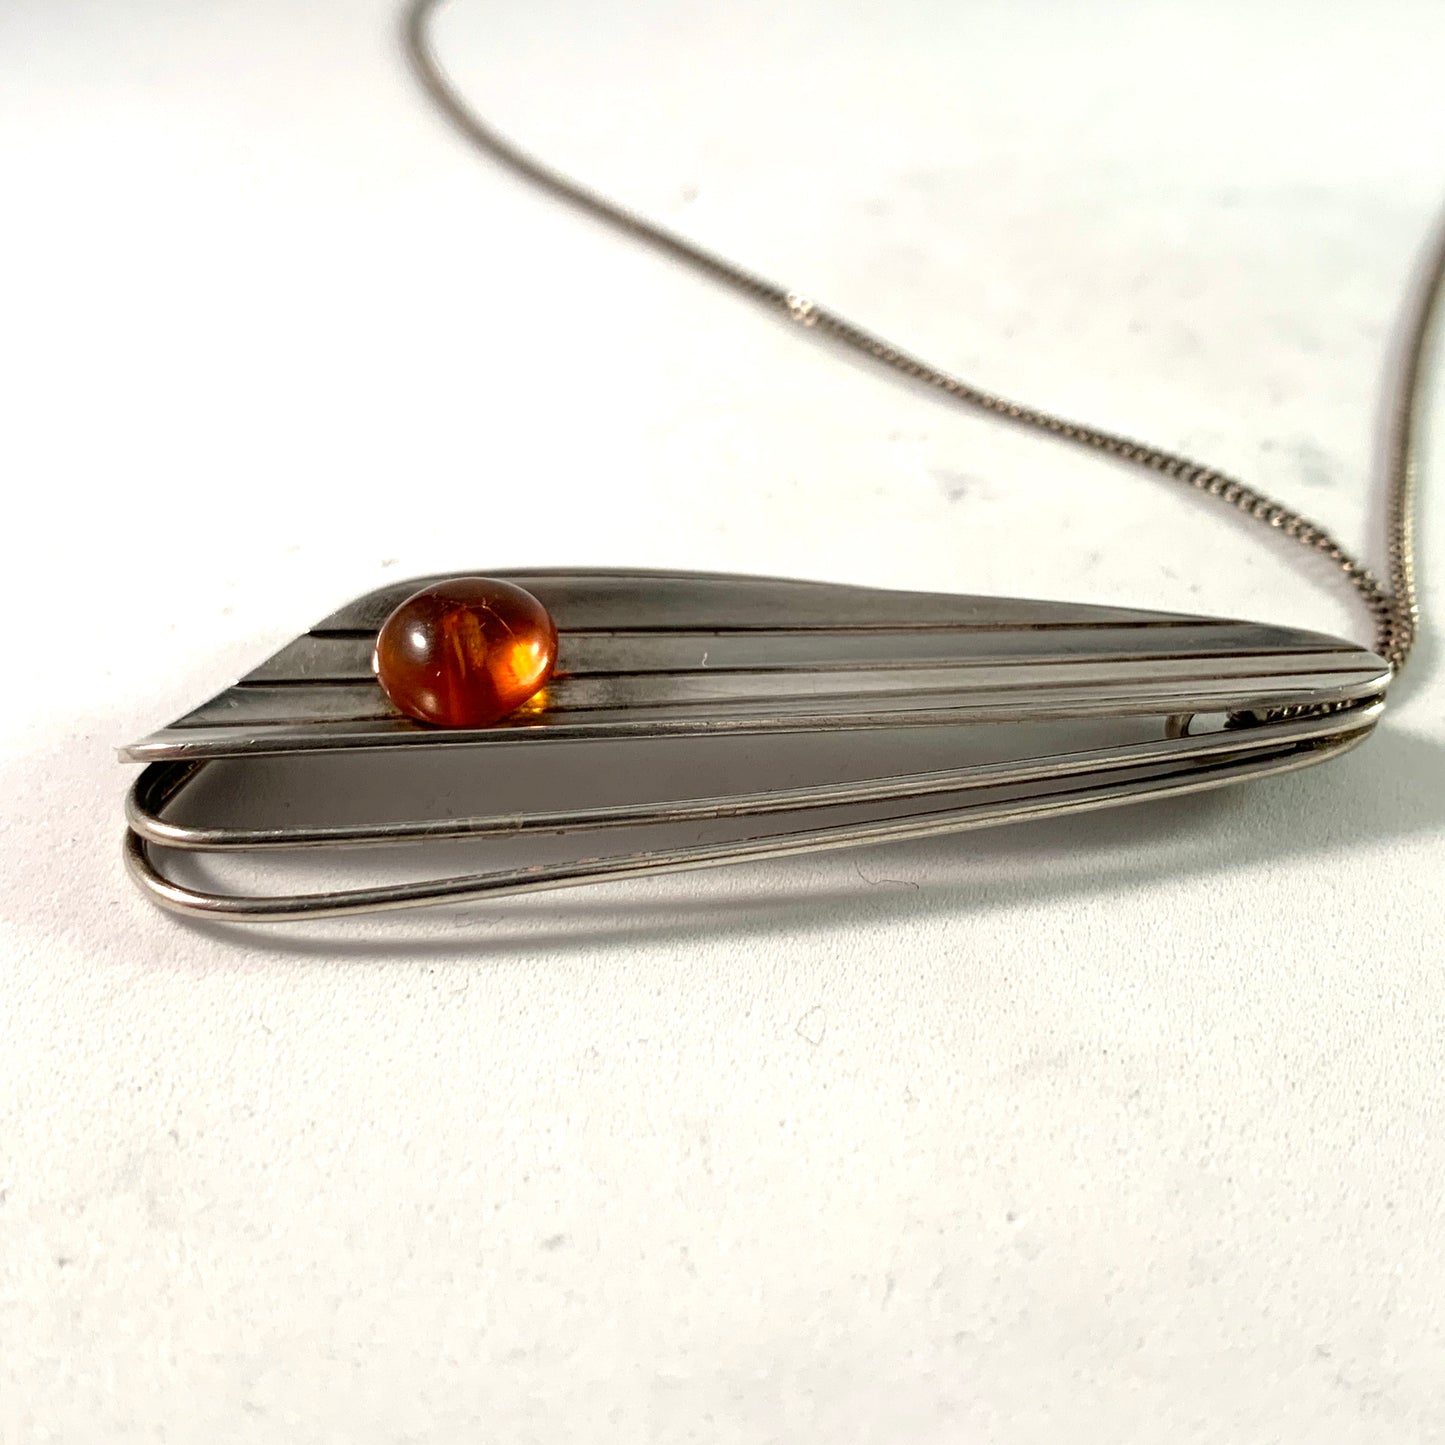 Fischland Ostseeschmuck, Germany 1960s Large 835 Silver Amber Pendant Necklace.